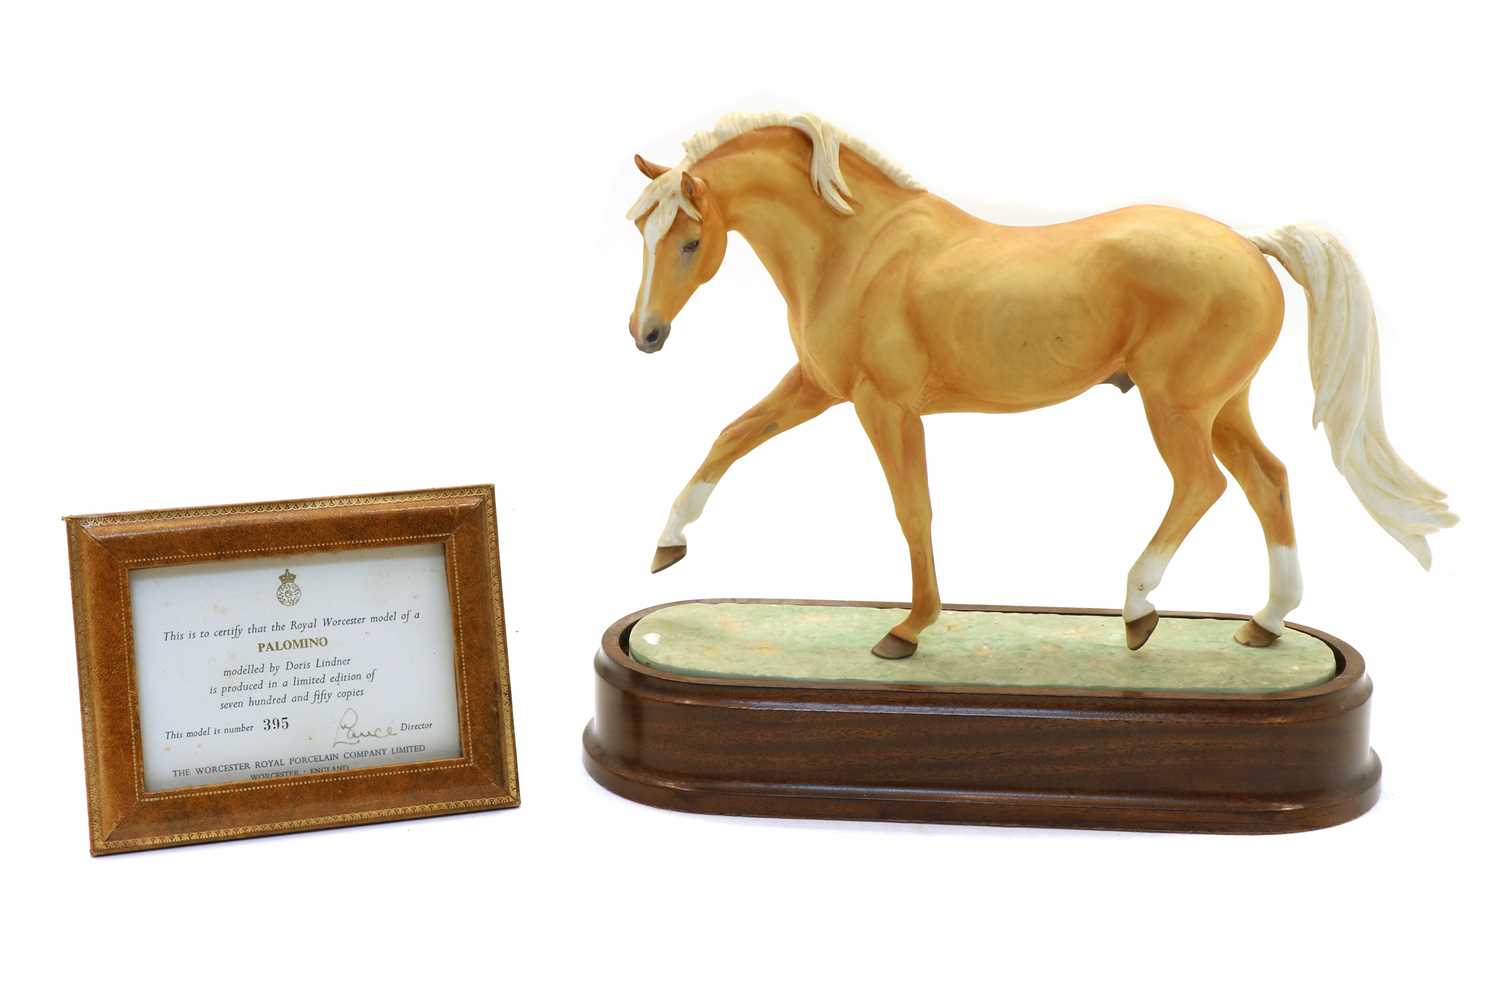 Lot 85 - A Royal Worcester limited edition model of a Palomino